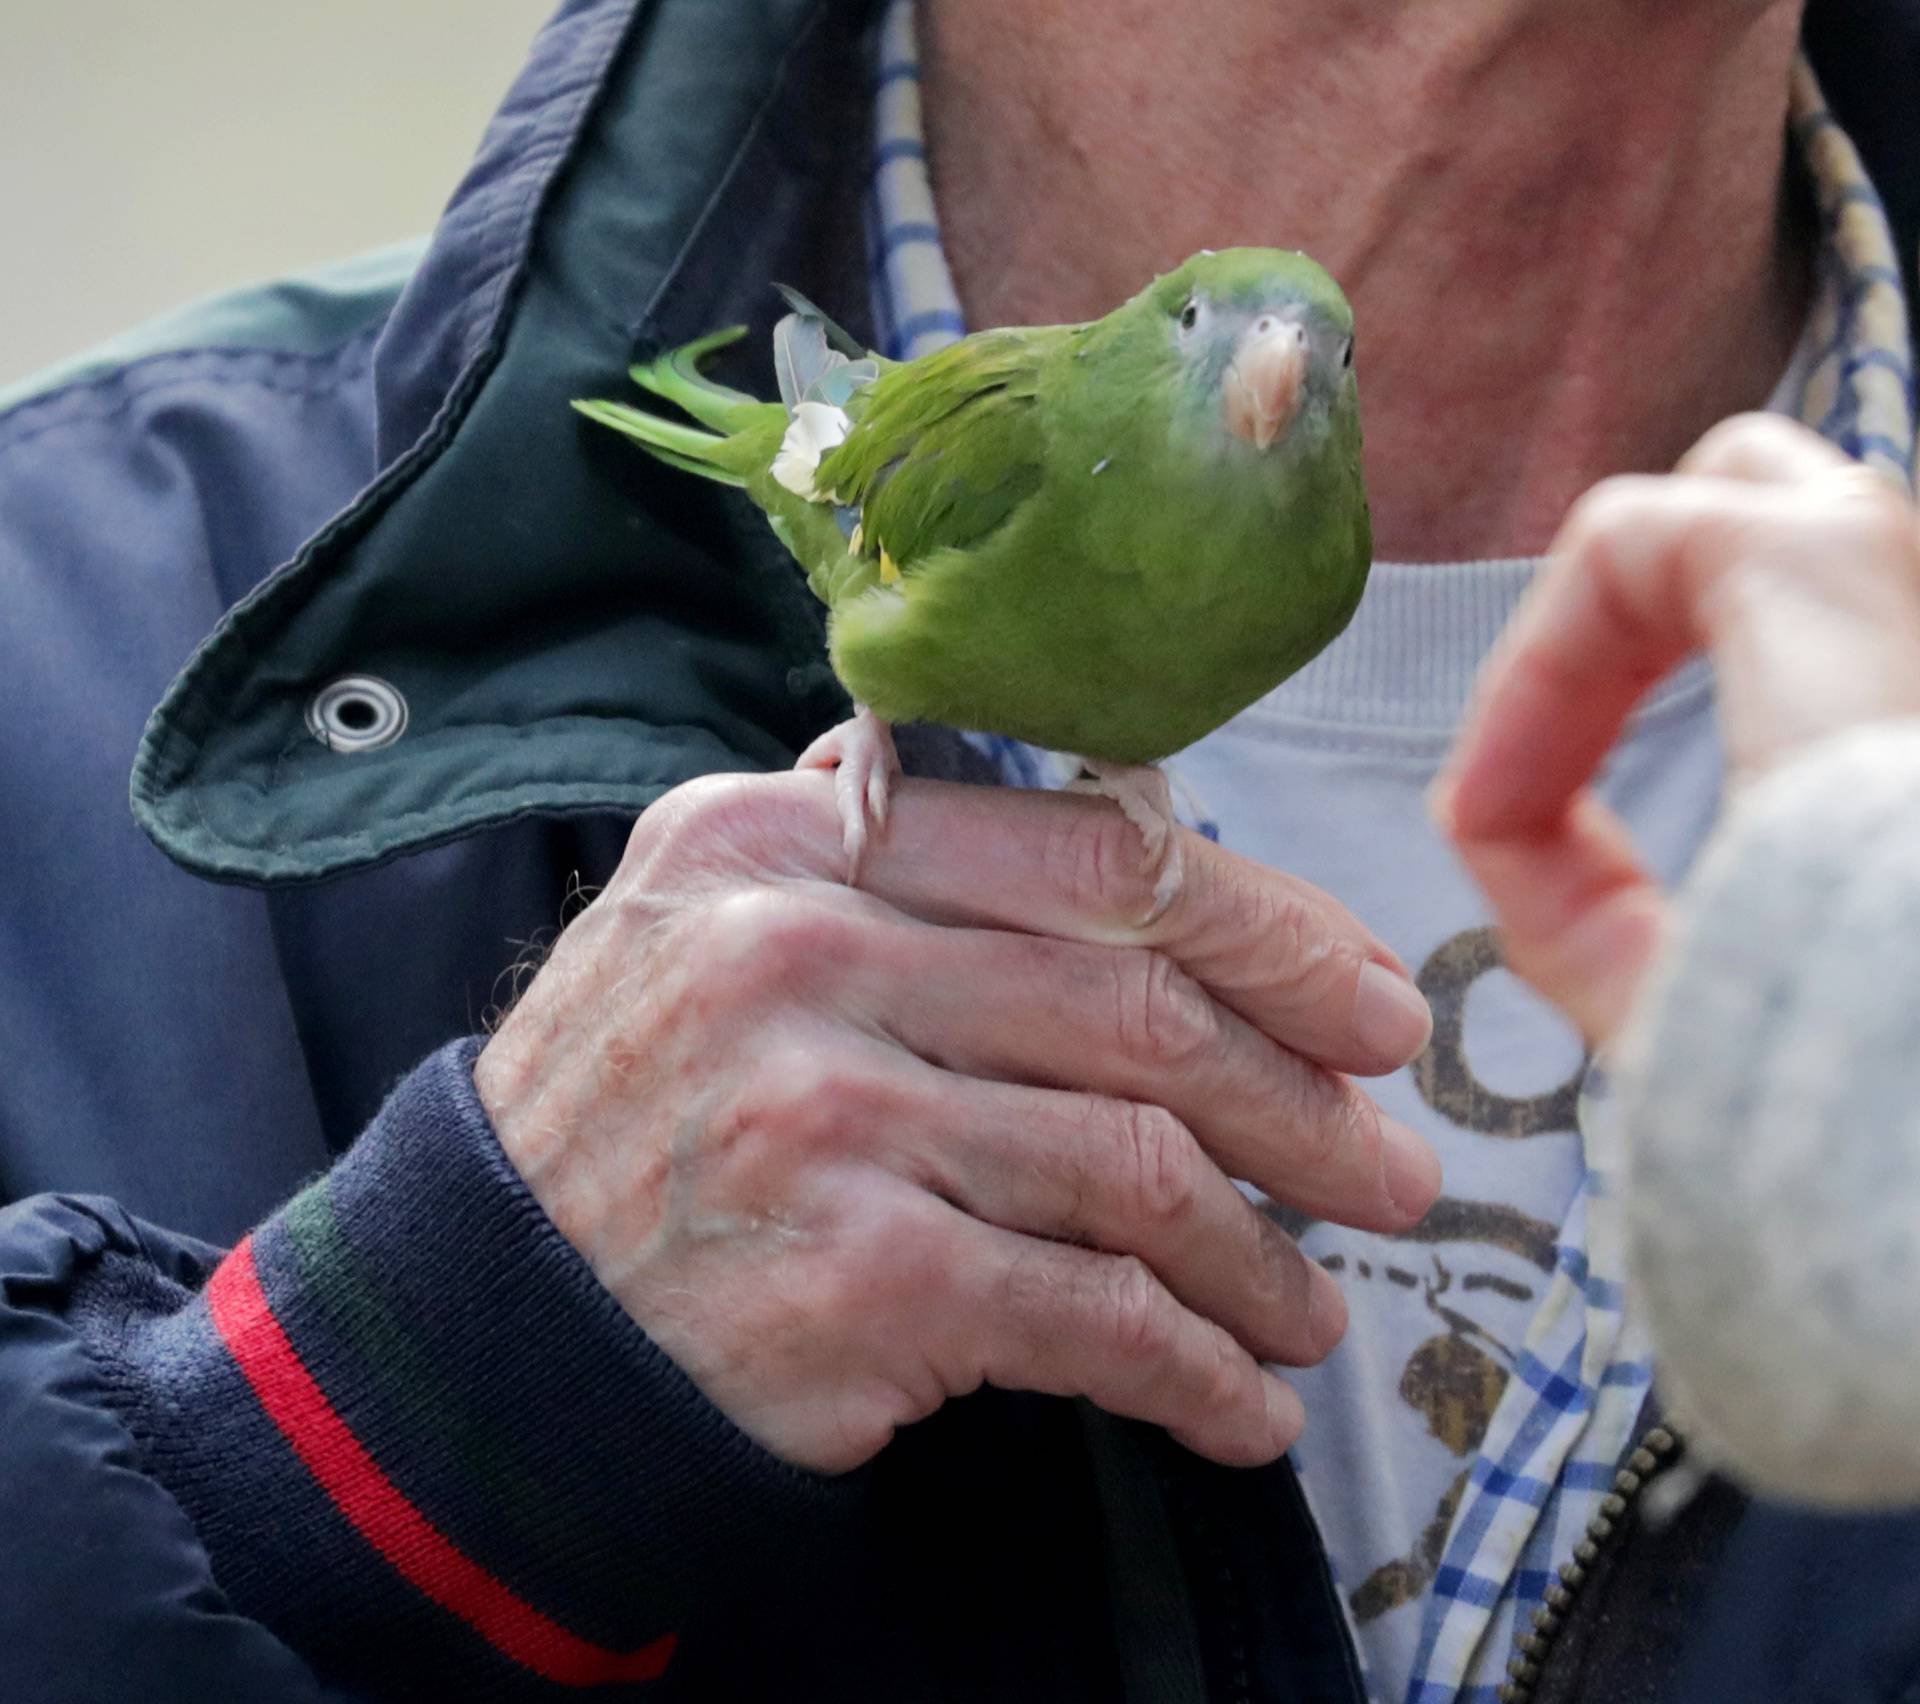 A demonstrator holds a bird during a protest outside the Brazilian embassy due to the wildfires in the Amazon rainforest, in Lima